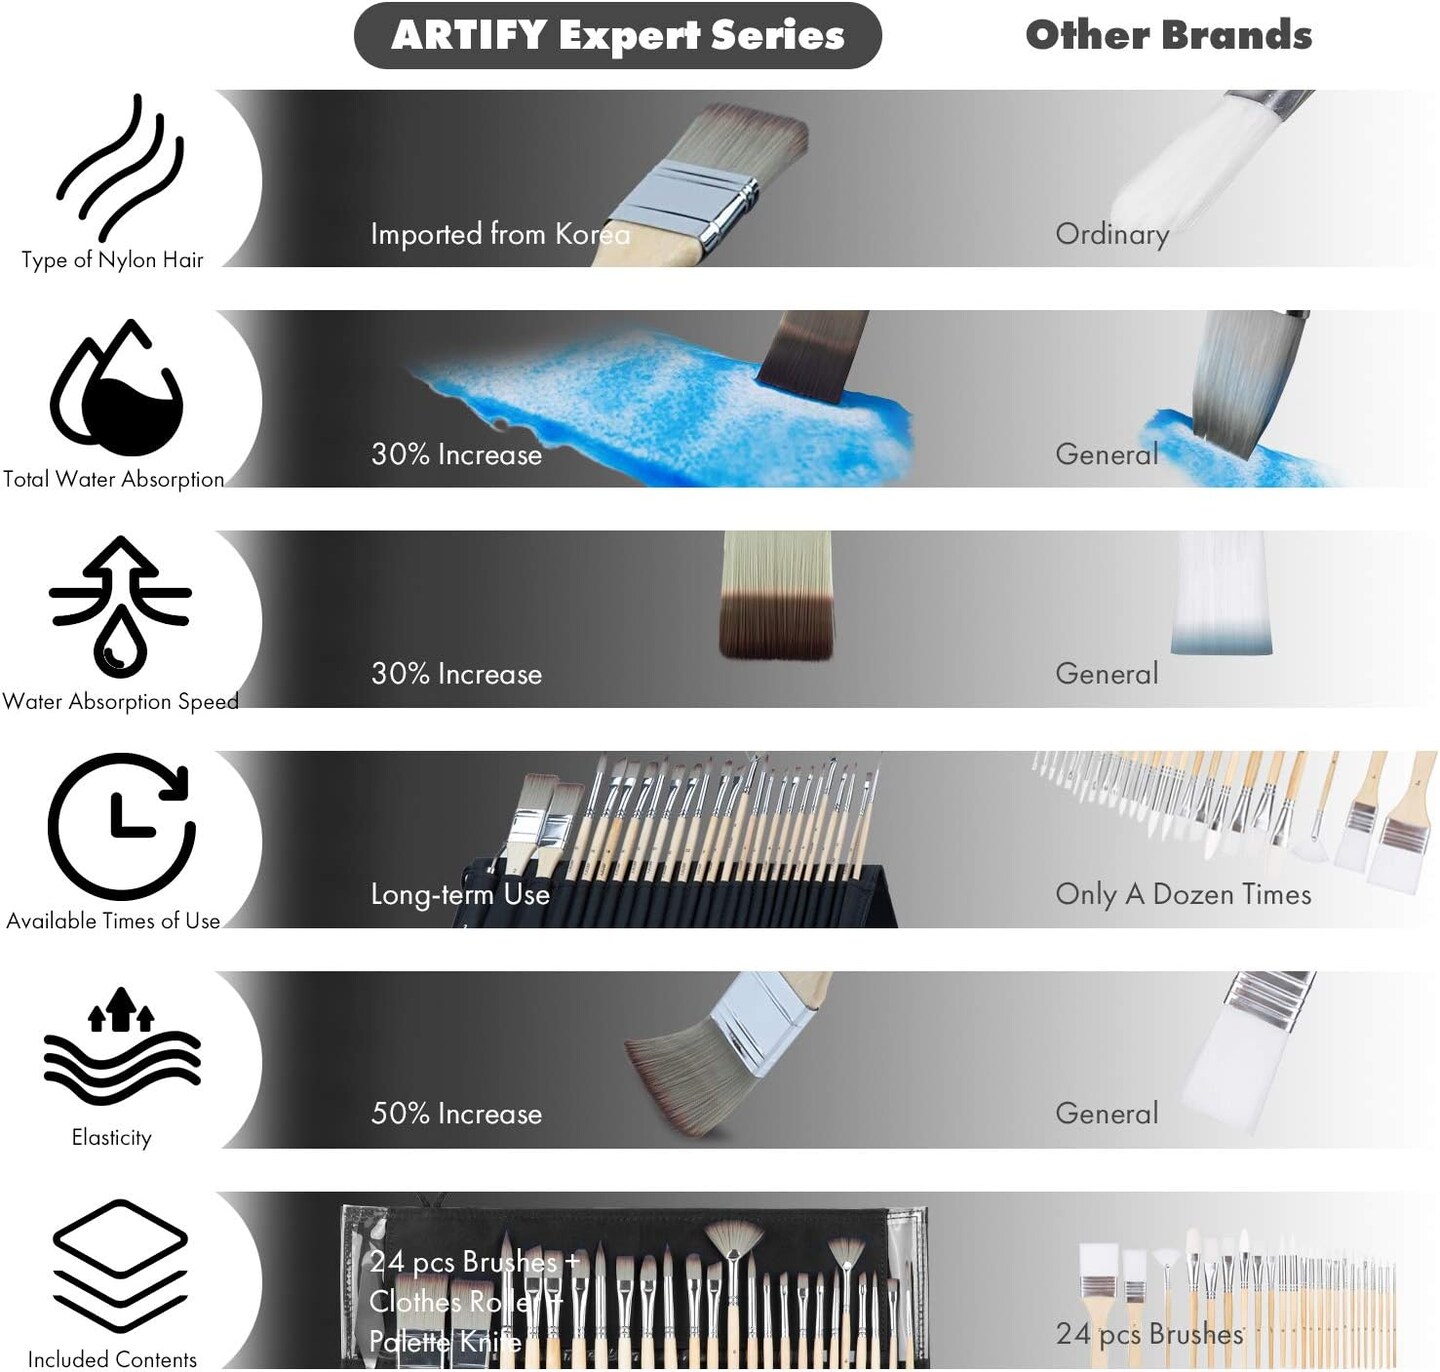 ARTIFY 24 Pieces Paint Brush Set, Expert Series, Enhanced Synthetic Brush Set with Cloth Roll and Palette Knife for Acrylic, Oil, Watercolor and Gouache (Birch)